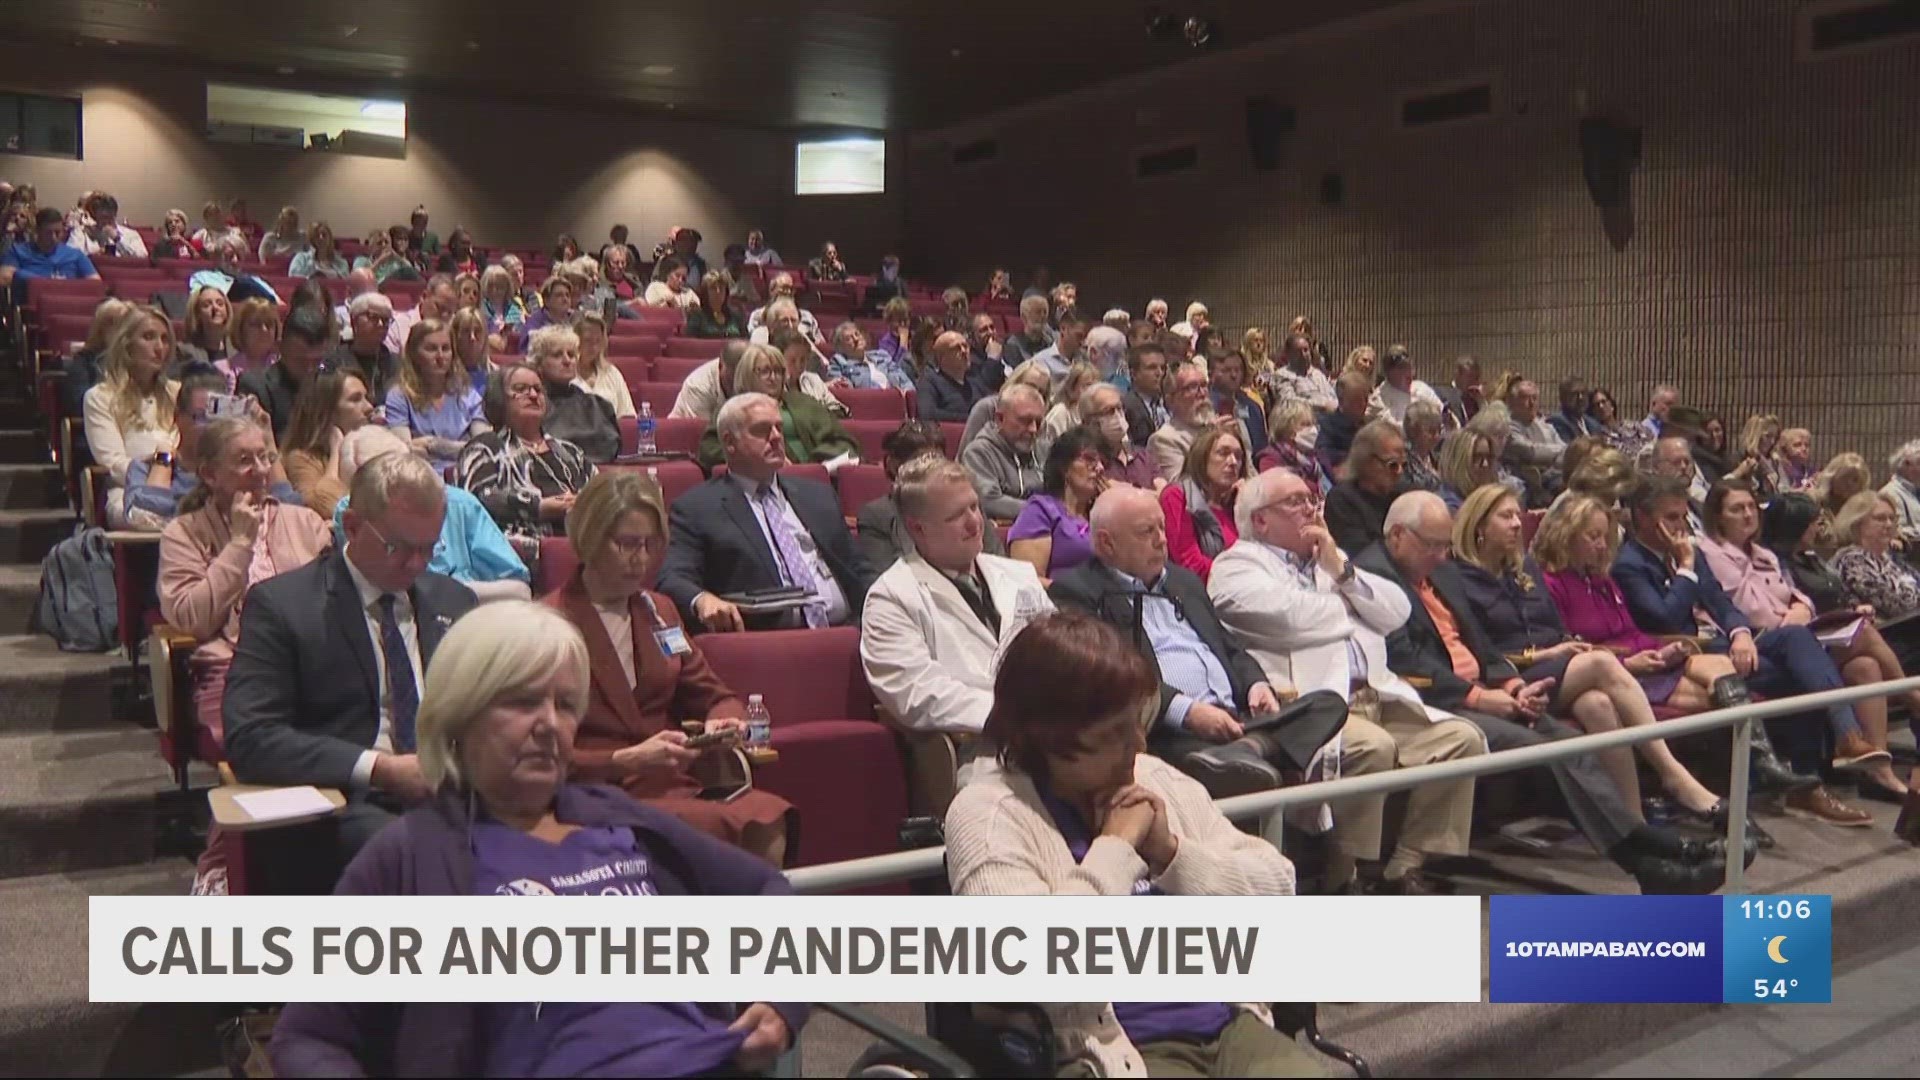 Despite the backlash, an internal review in February found that the hospital performed well during the pandemic.